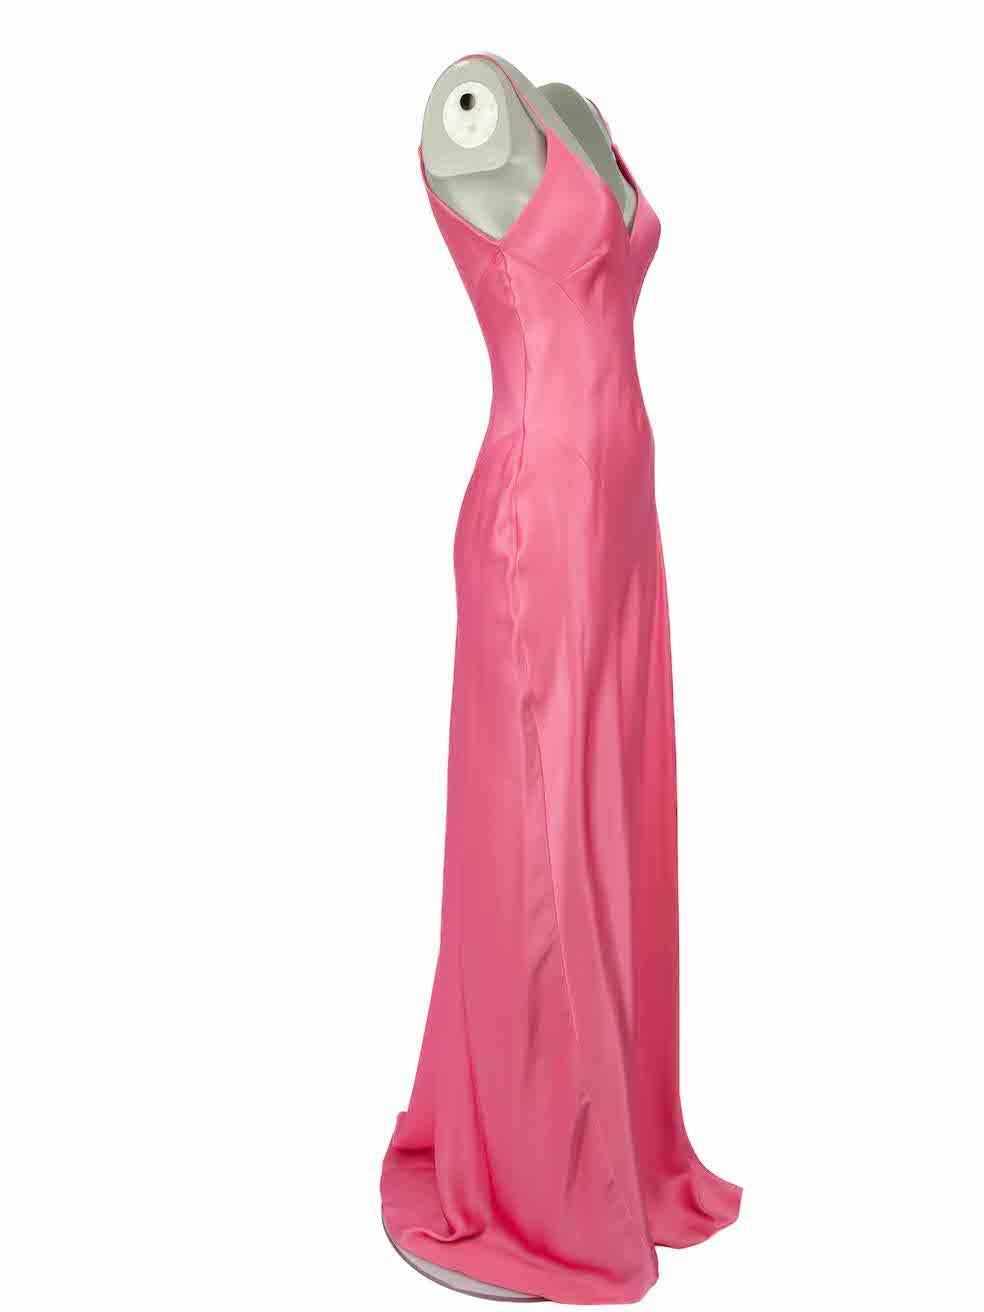 CONDITION is Never worn, with tags. No visible wear to dress is evident on this new Ralph & Russo designer resale item.
  
Details
Pink
Silk
Slip dress
Sleeveless
V-neck
Midi
Front leg slit
Side zip fastening

Made in UK
  
Composition
100% Silk
 